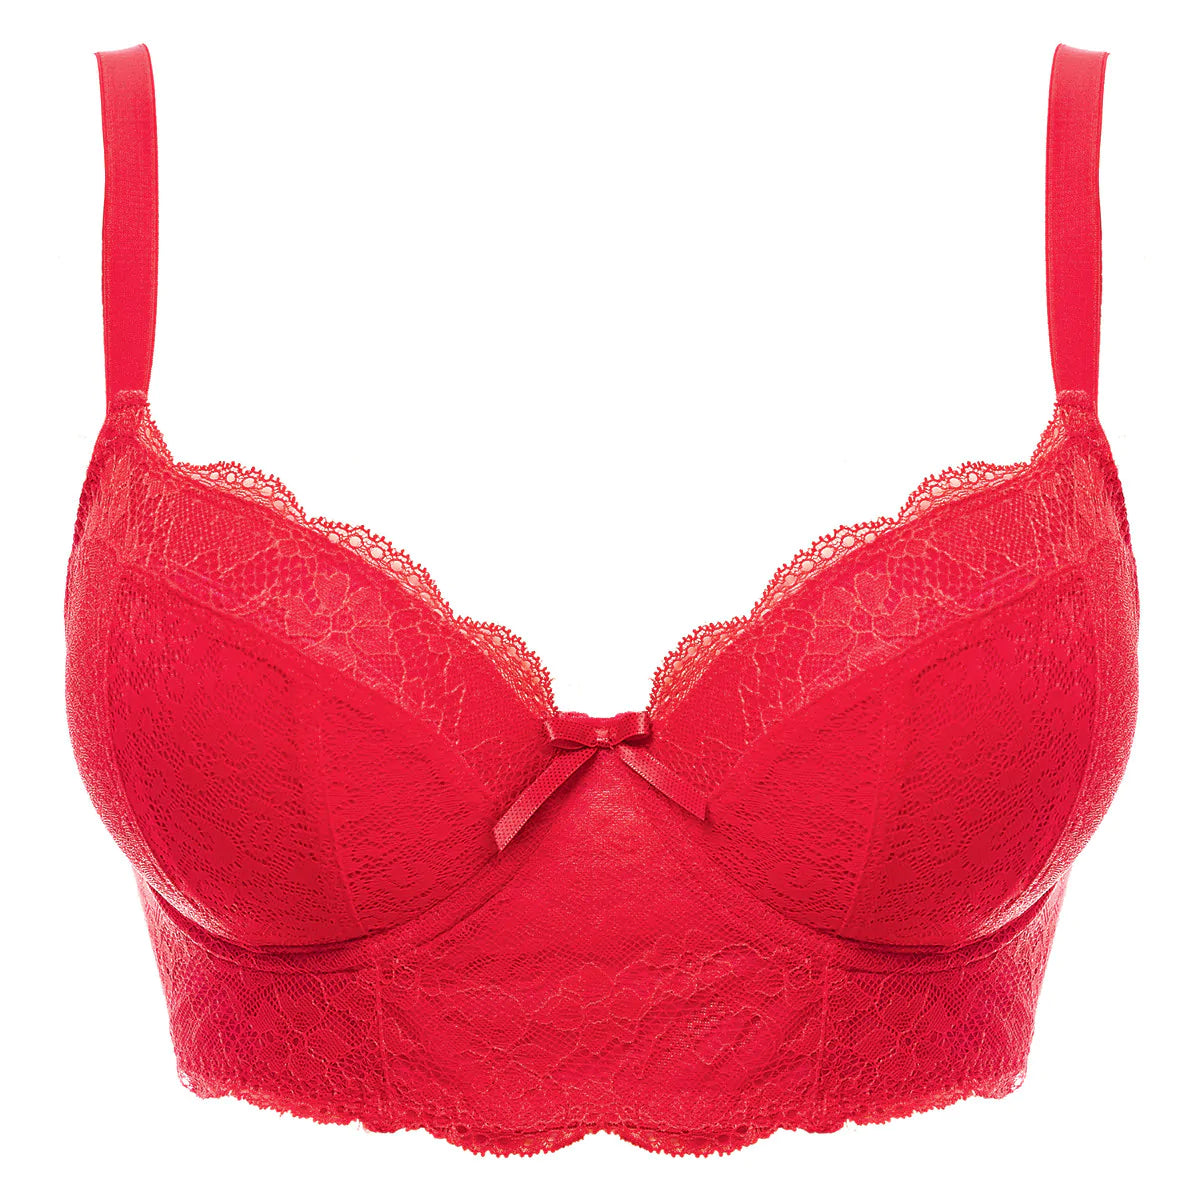 Offbeat Chilli Red Side Support Bra from Freya